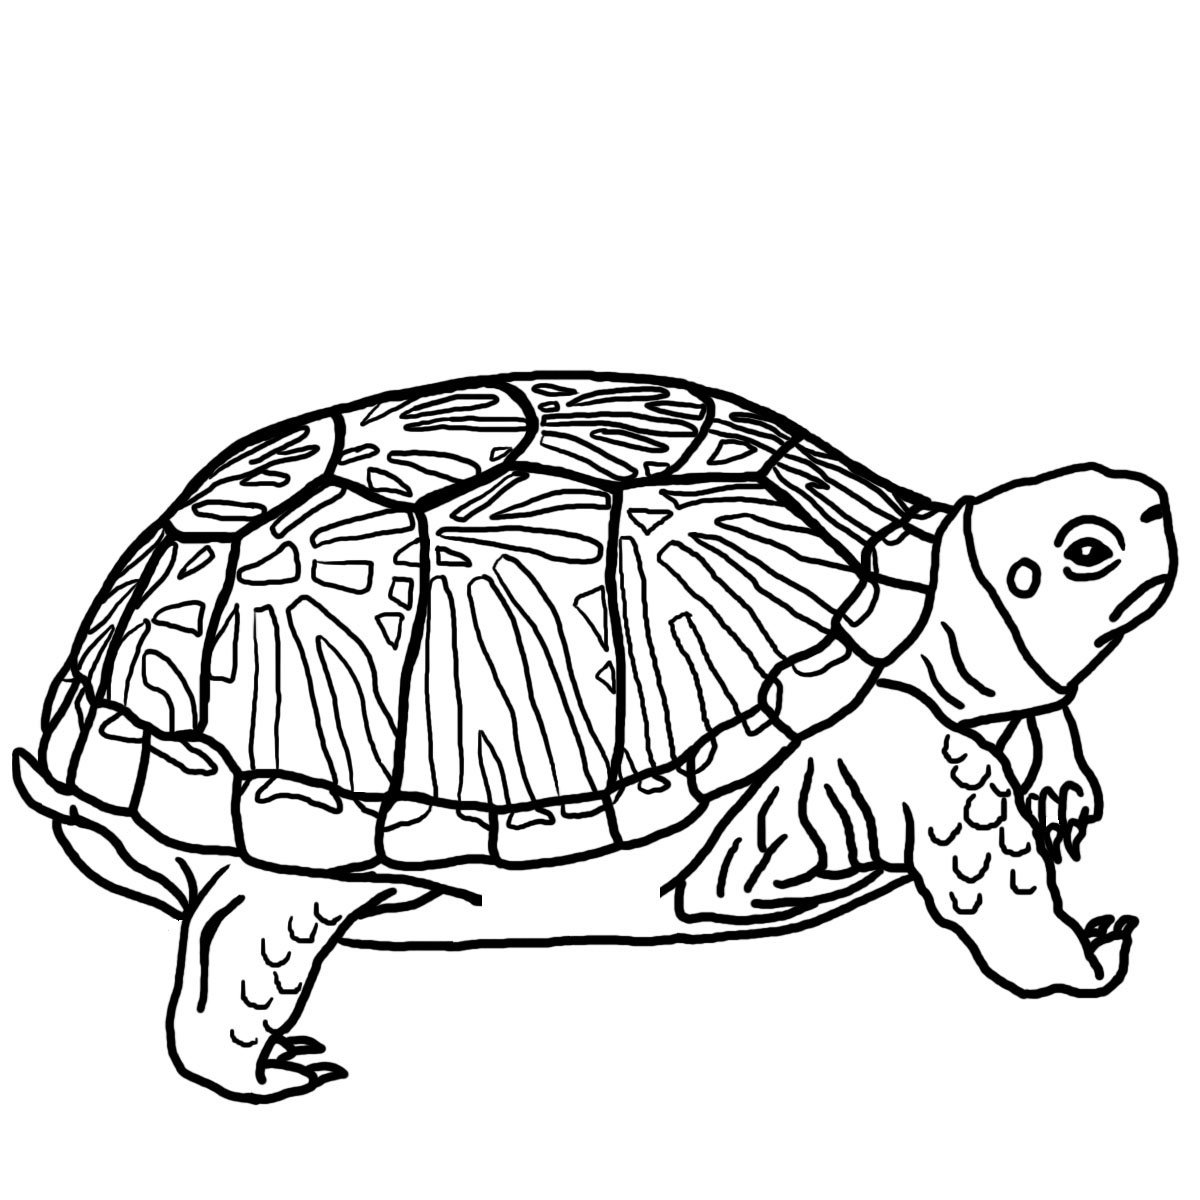 Turtle Clip Art Black And White   Clipart Panda   Free Clipart Images